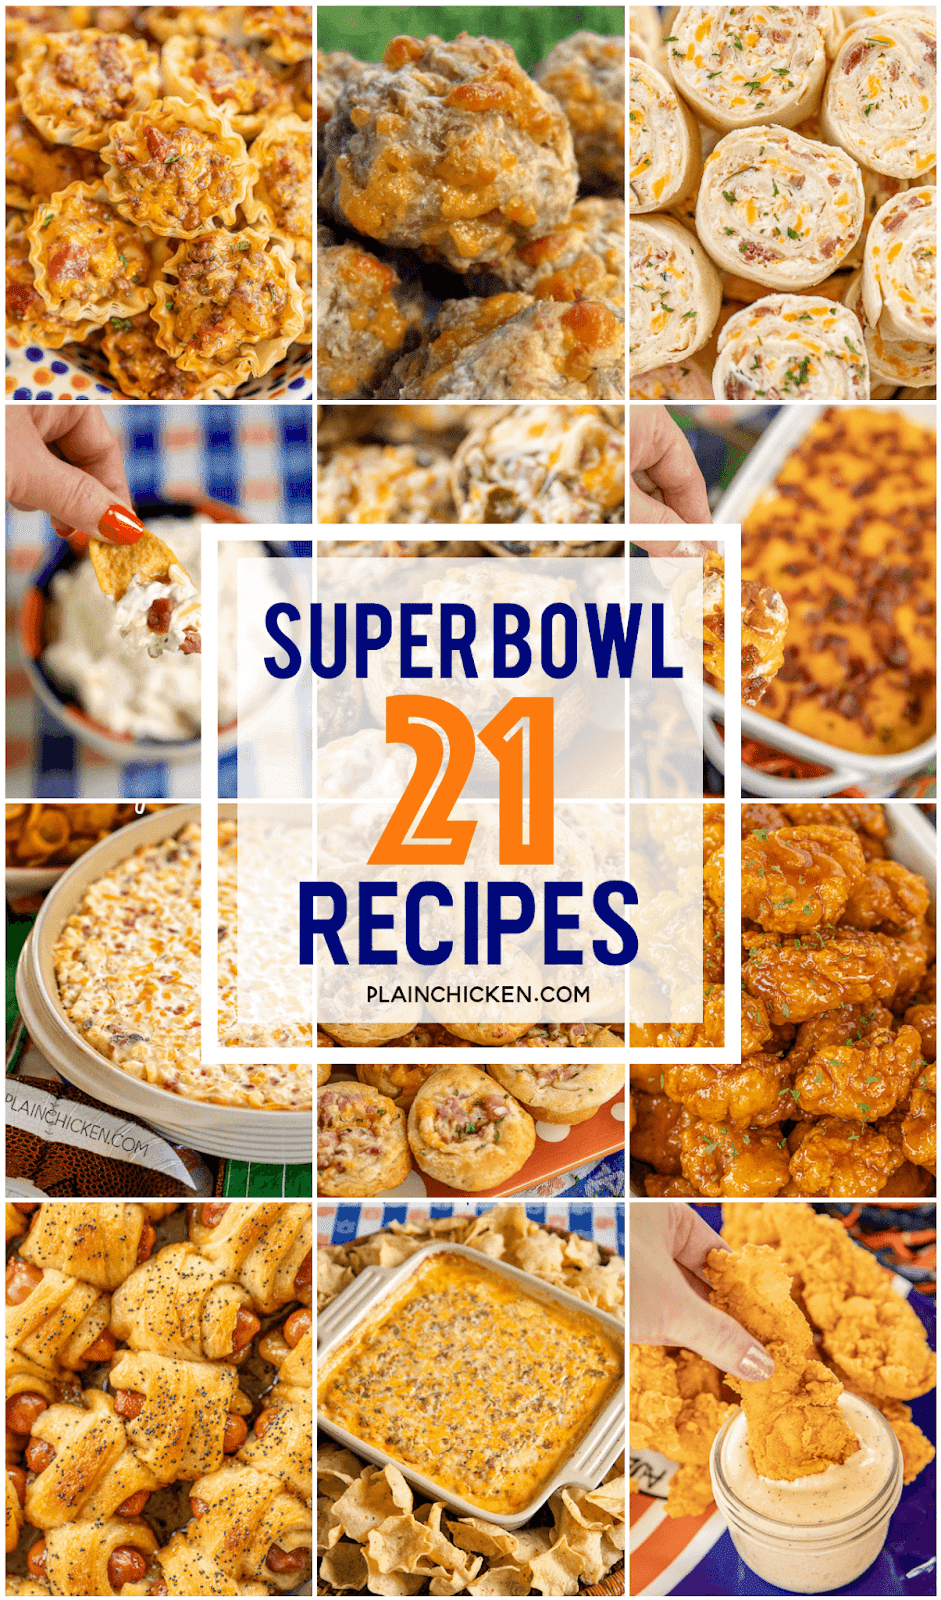 Easy Super Bowl Party Recipes - 21 easy party snacks for your Super Bowl party! Dips, finger foods, desserts - something for everyone! Can make most ahead of time and serve when ready for the big game! #tailgating #appetizer #partyfood